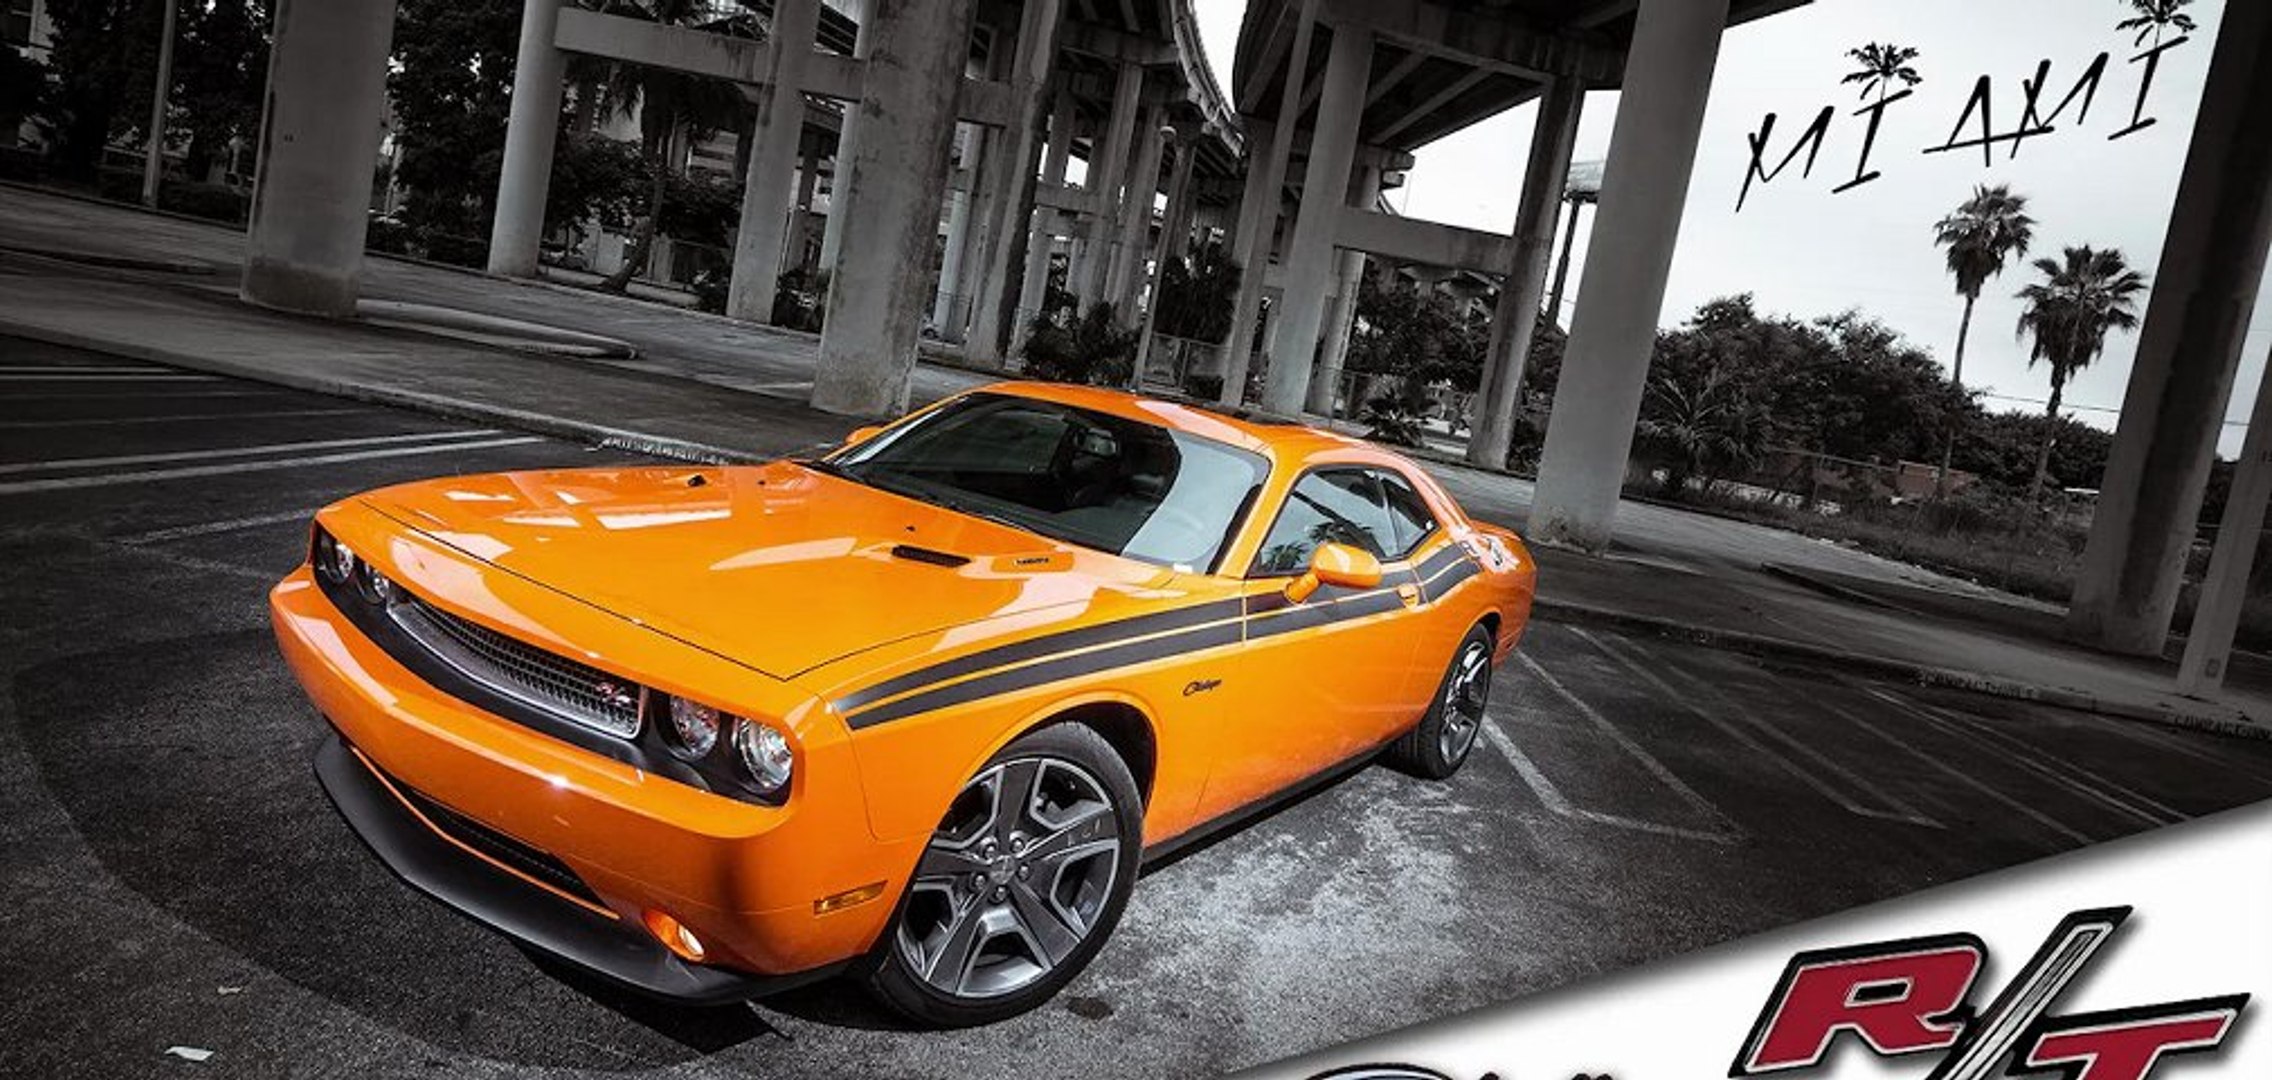 ⁣Dodge challenger RT - Miami South Beach - Creedence clearwater Fortunate son (no official clip)